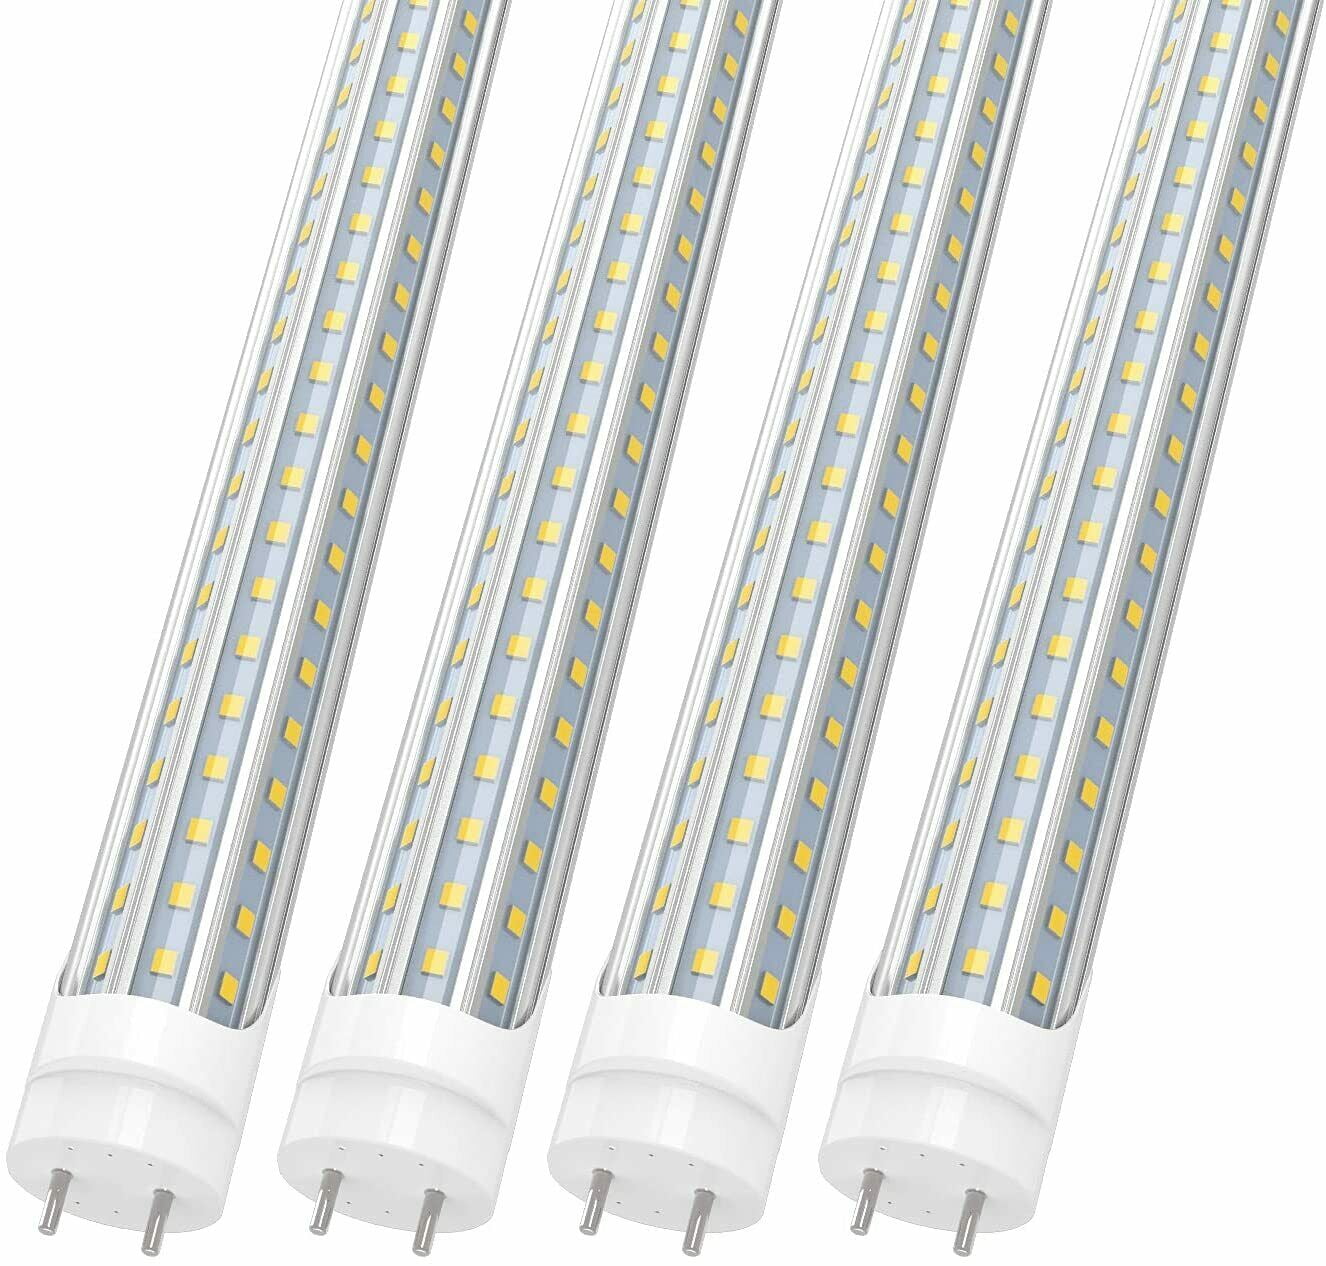 US Warehouse 18W T8 LED 4FT Replacement G13 Bi-Pin Light For Shop/Home/Factory 